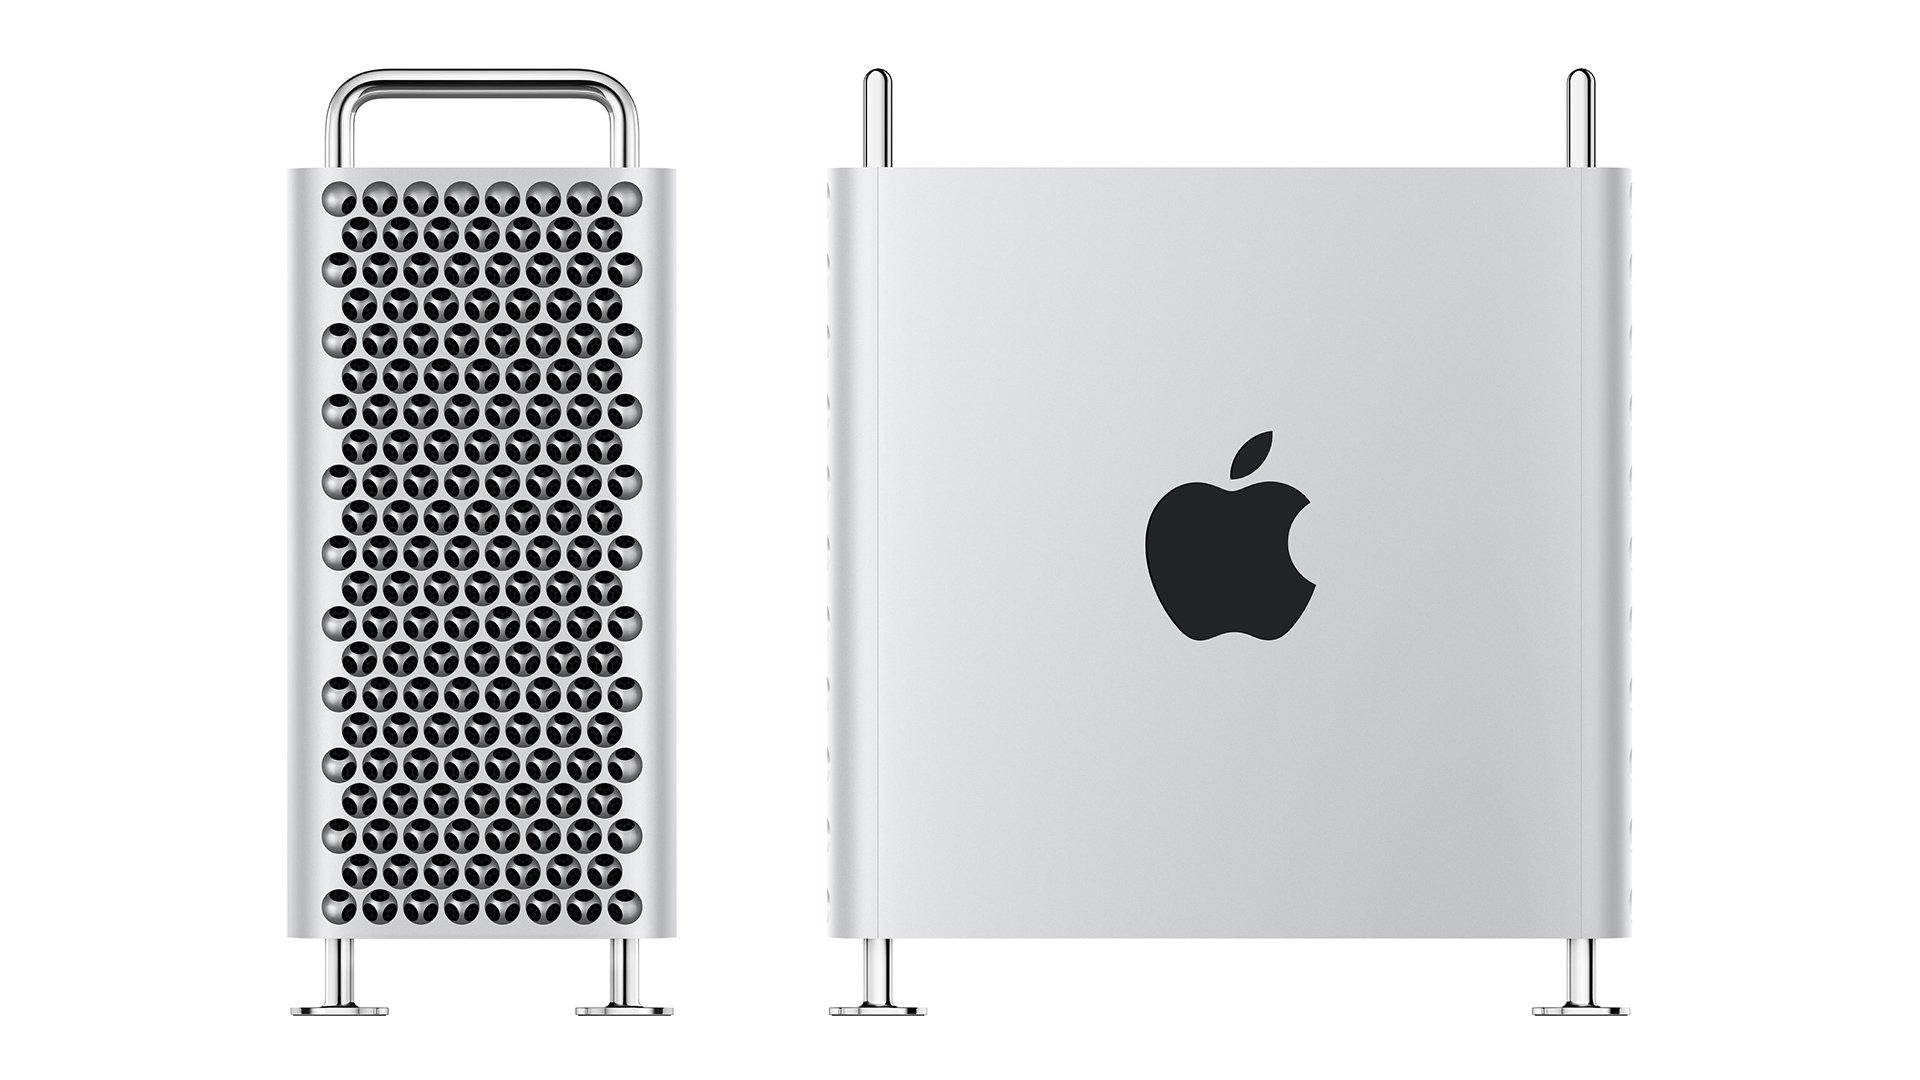 build a 2010 mac pro for video editing